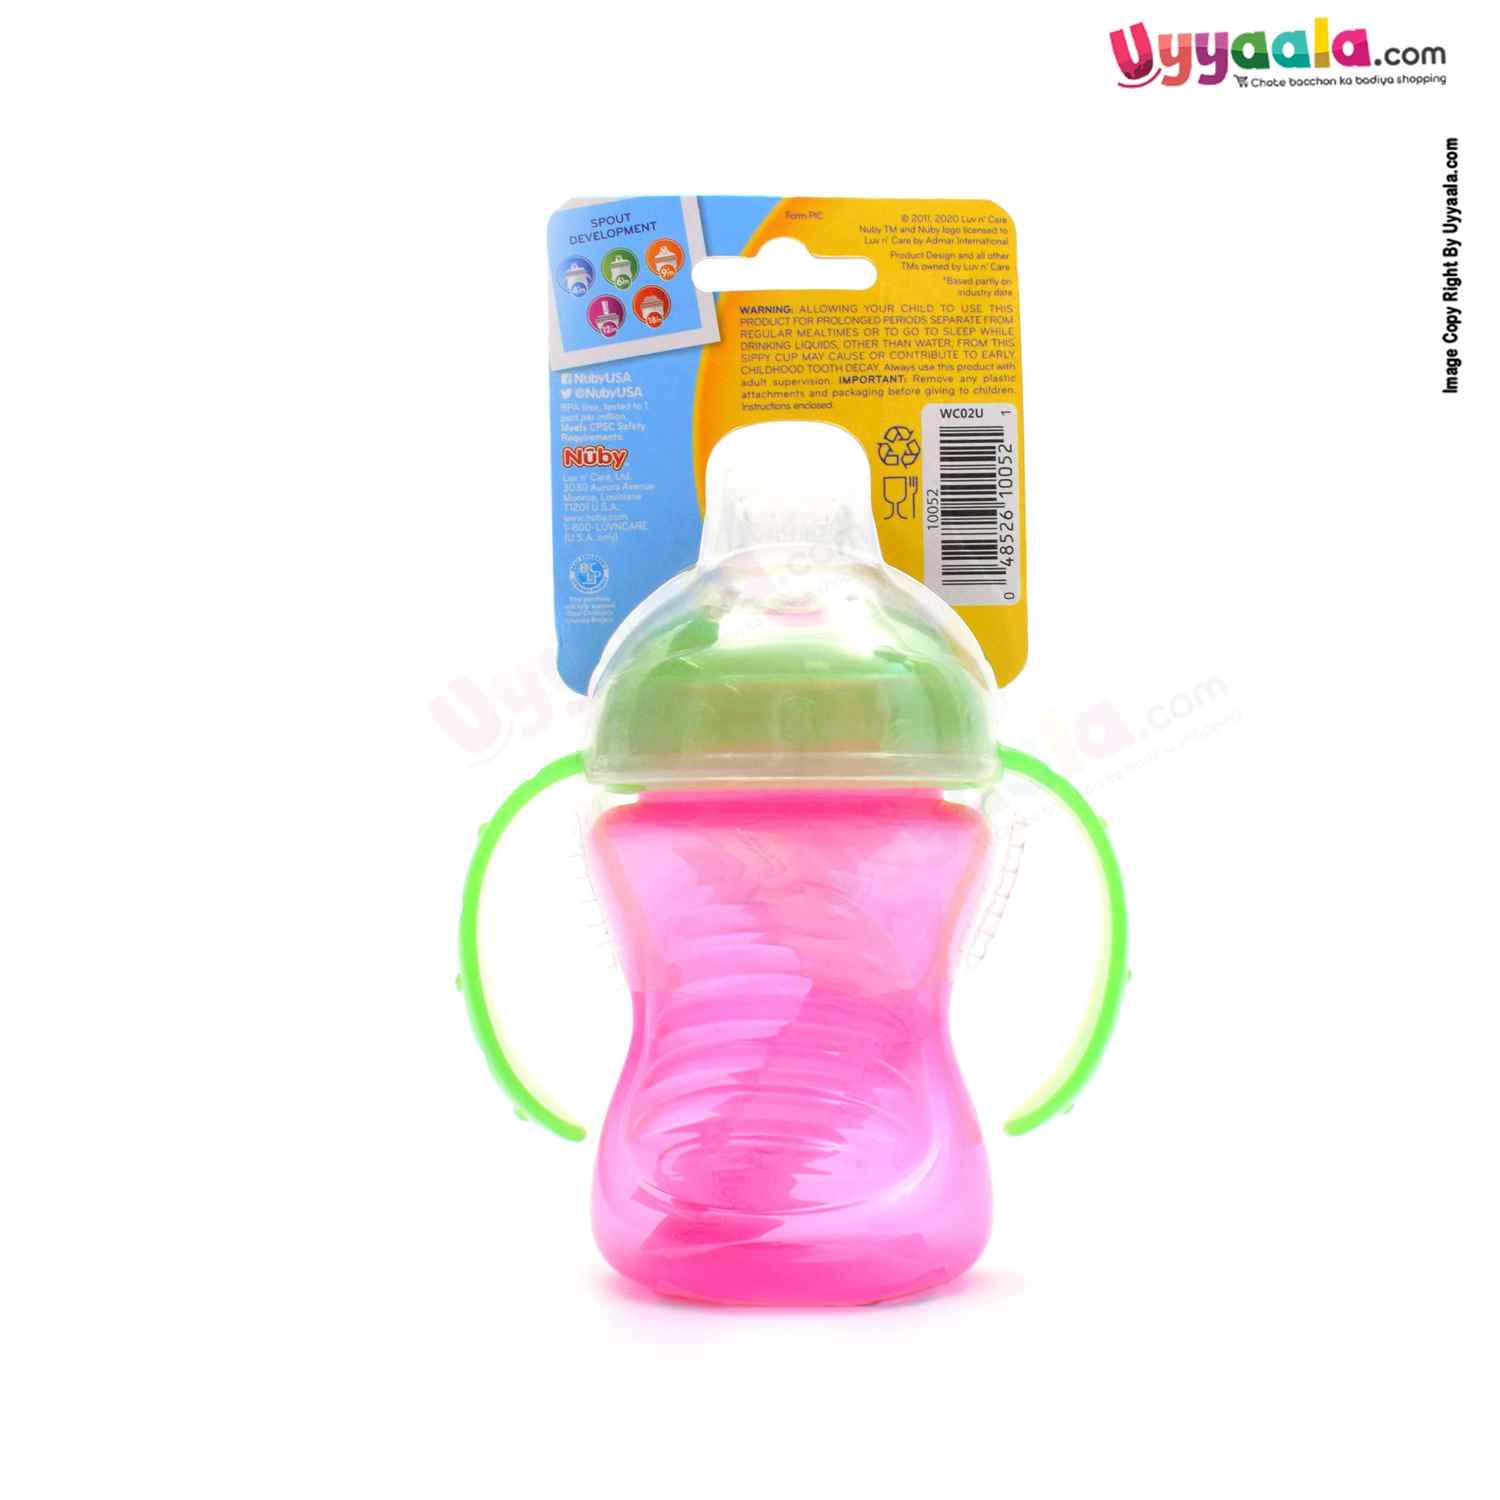 Nuby 1St Sipeez 'Grip n Sip' With Hygienic Cover Sipper Soft Flex Spout 240ml 4+m Age